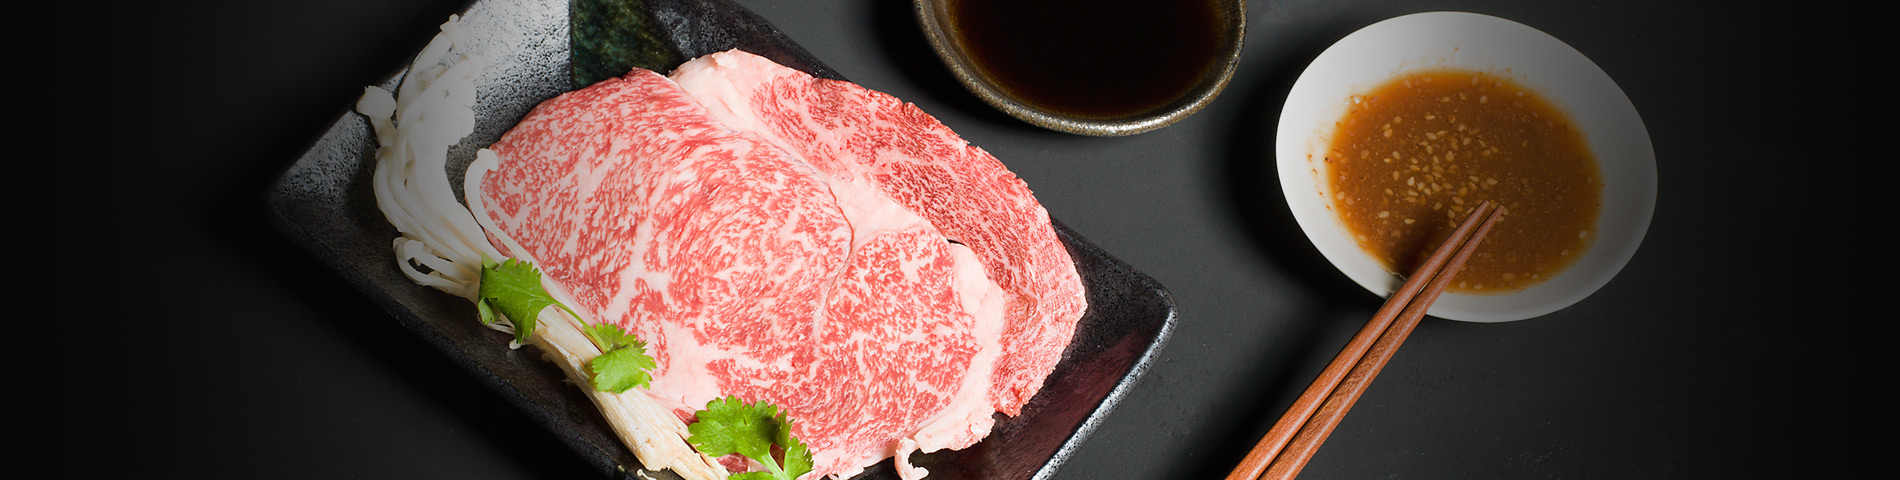 Full-blood Wagyu Products